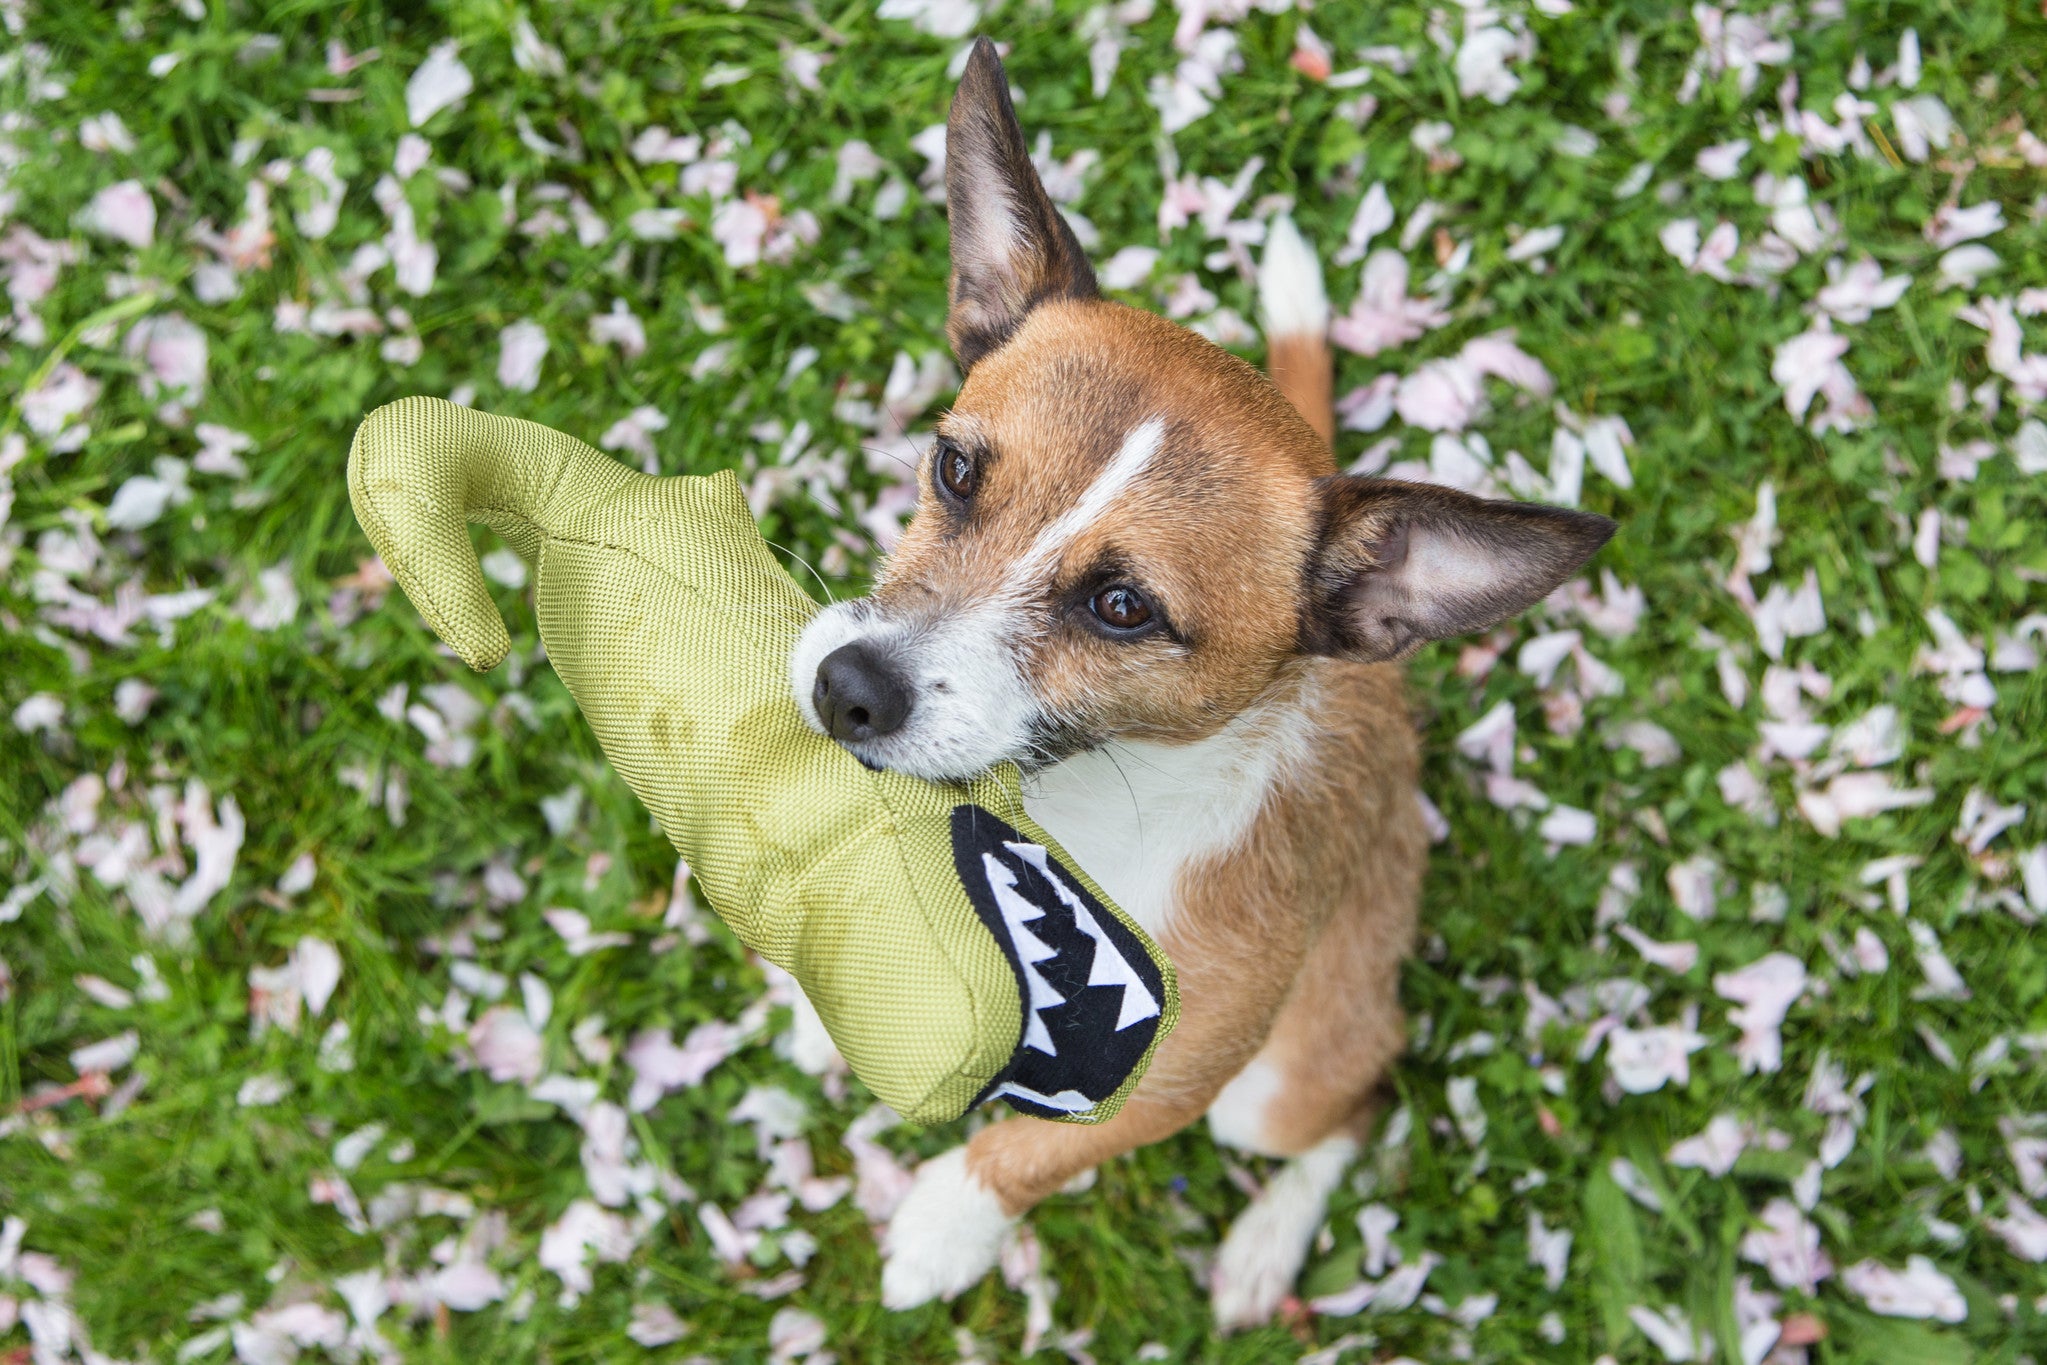 Beco Plush Toy - Aretha the Alligator - Beco Pets